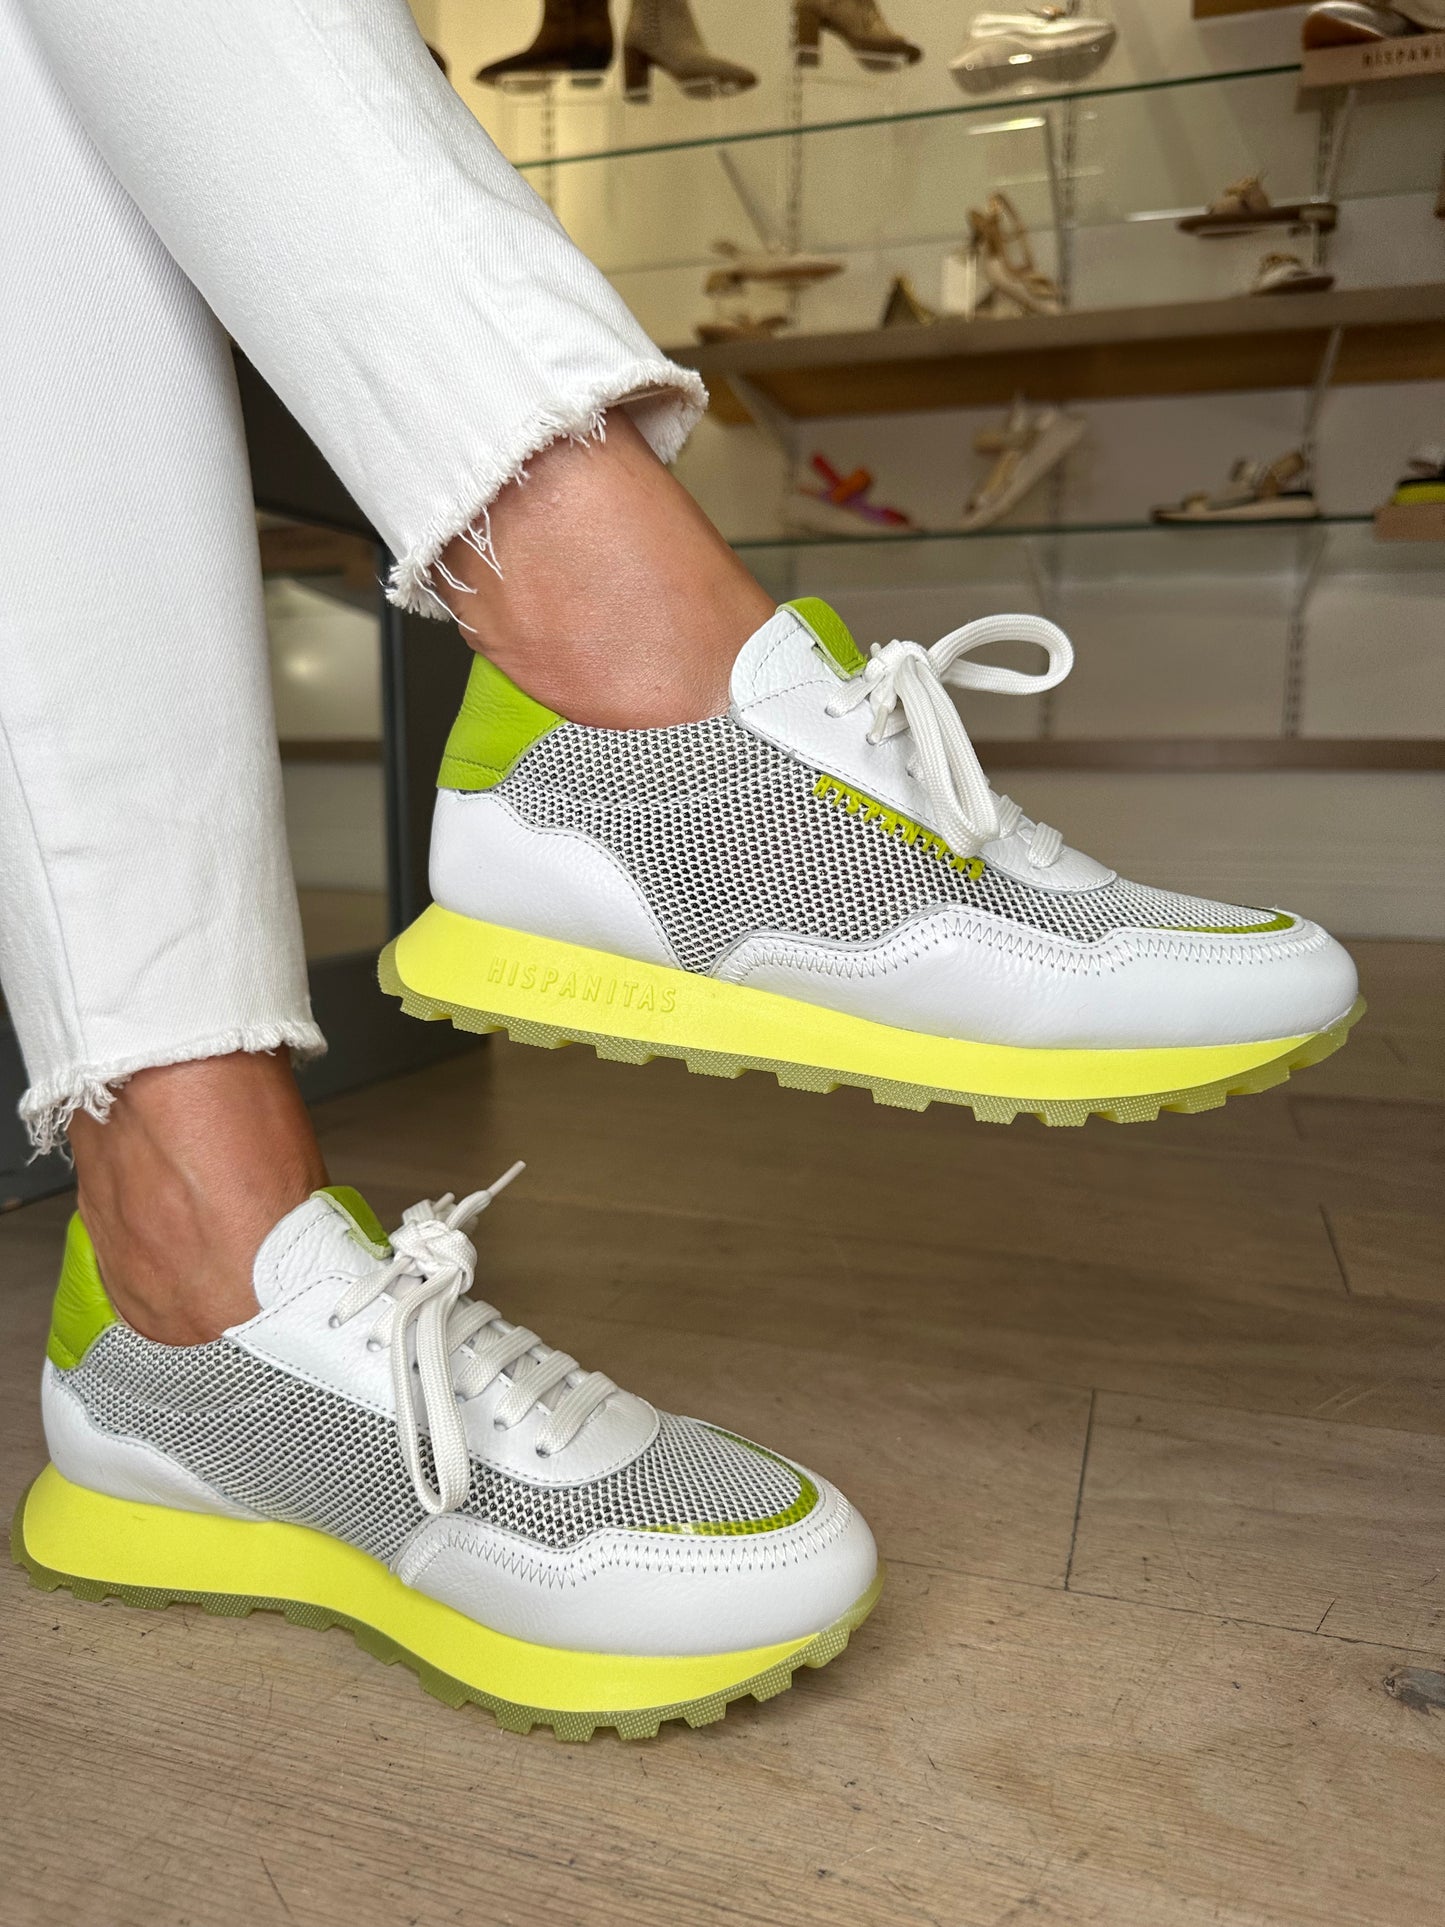 Hispanitas - Lime Green / White Mesh Lace Up Trainer With Yellow Sole